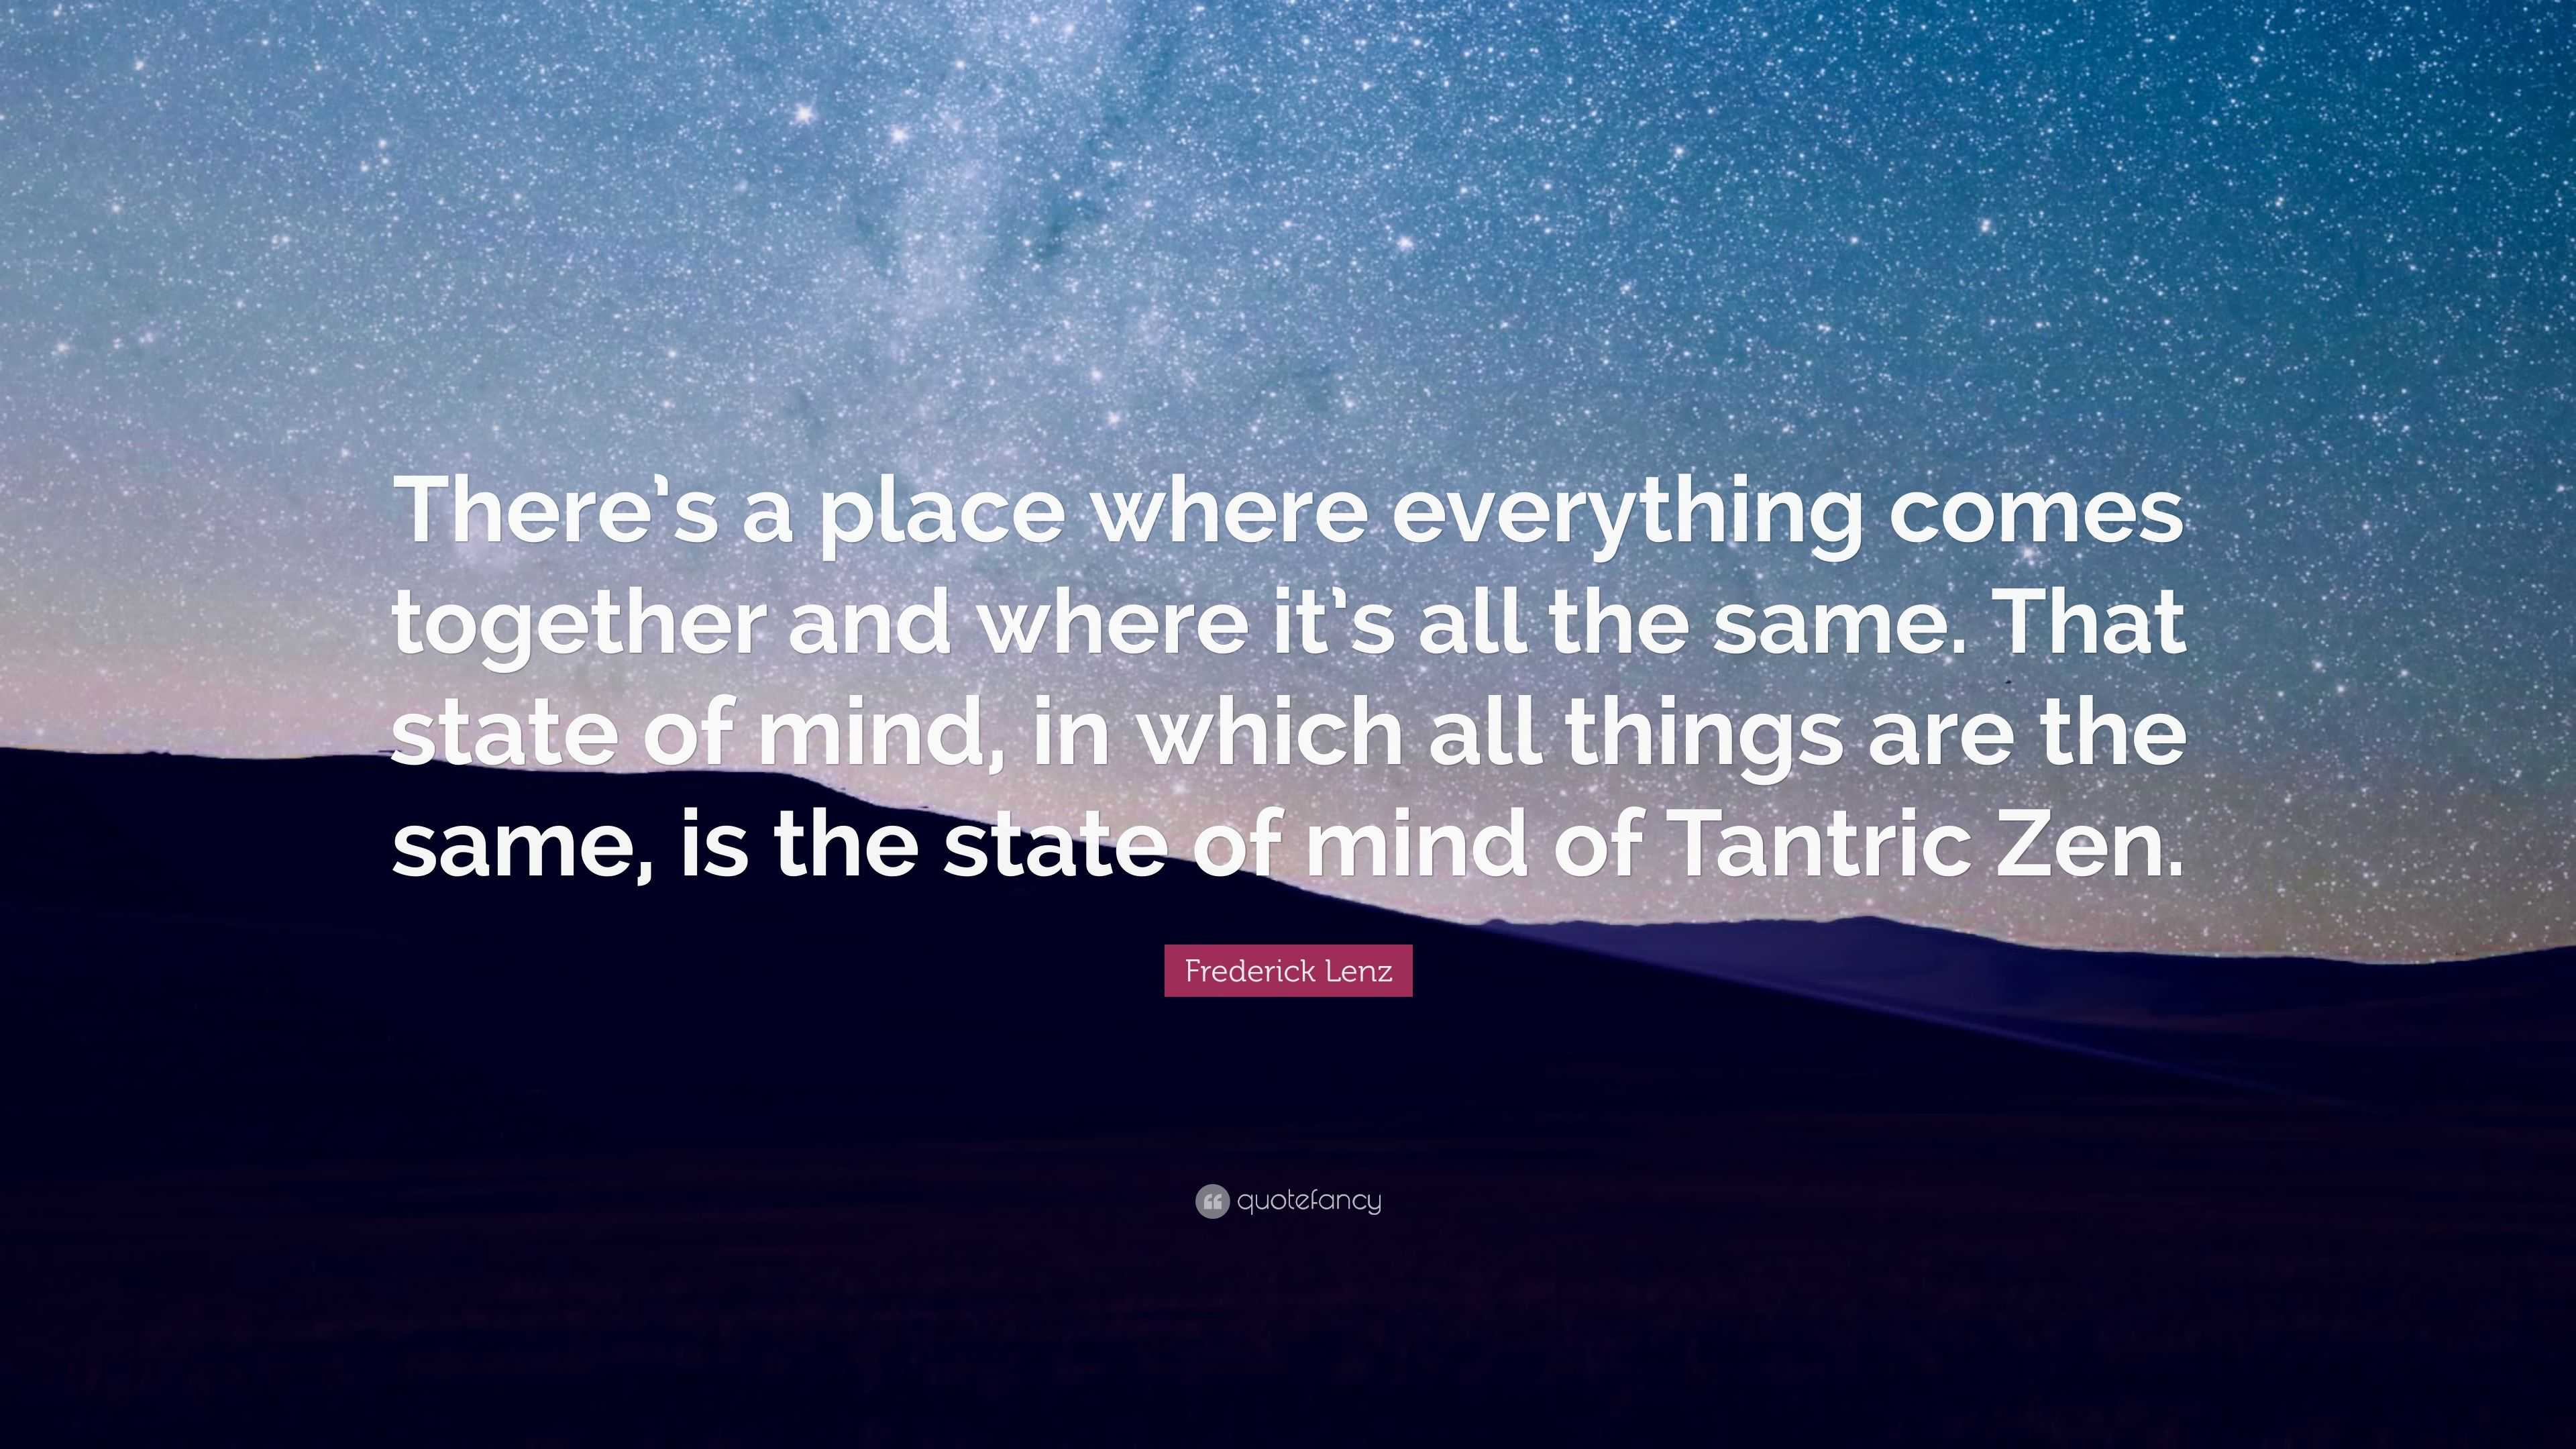 Frederick Lenz Quote: “There's a place where everything comes